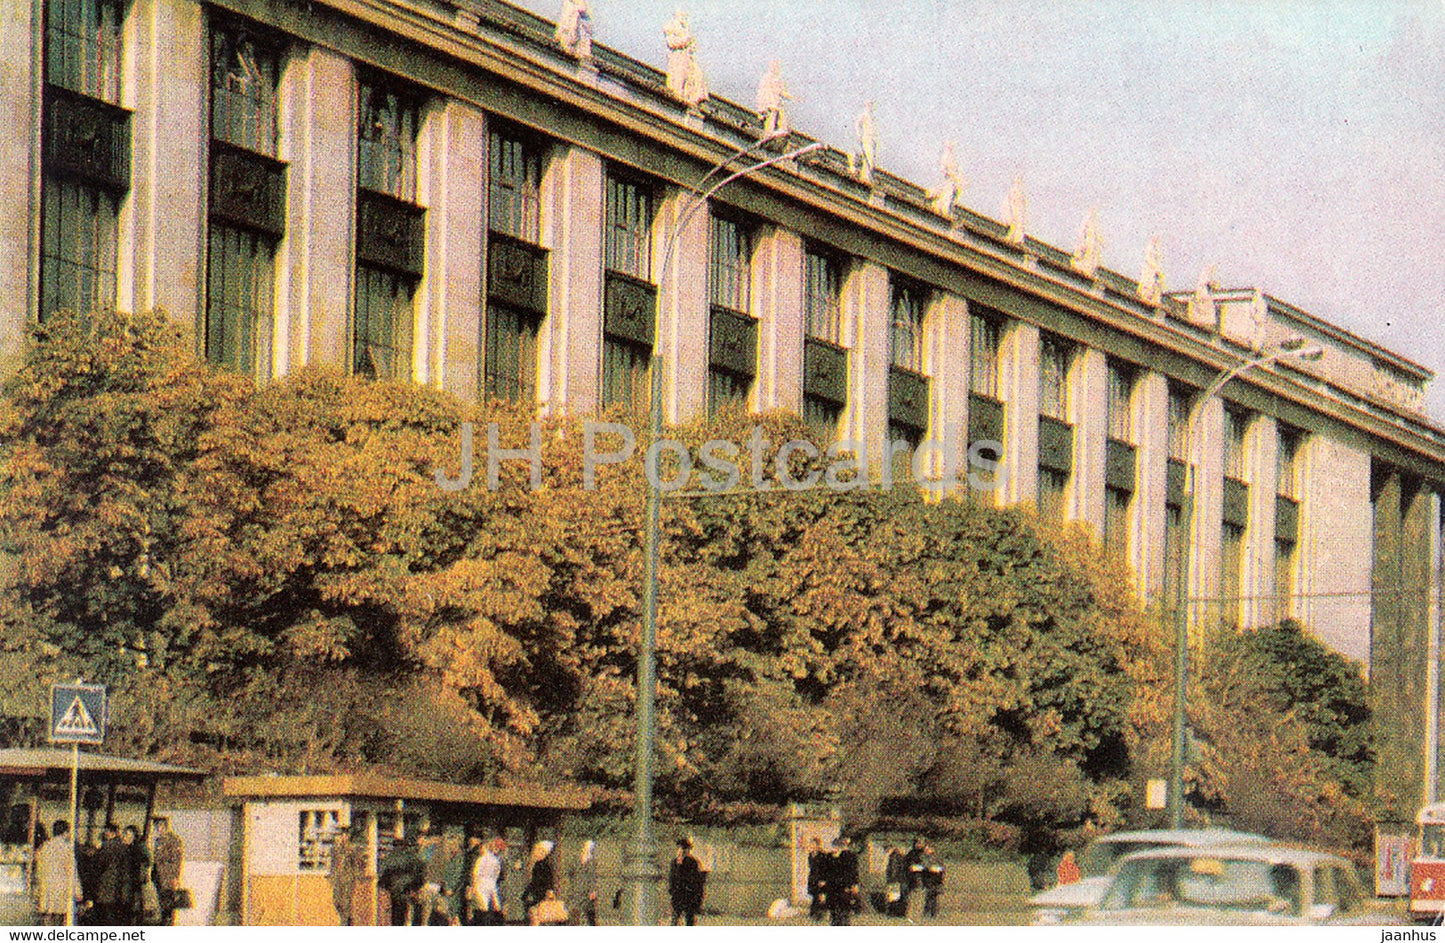 Moscow - Lenin State Library - The New Building of the Lenin State Library - 1 - 1974 - Russia USSR - unused - JH Postcards